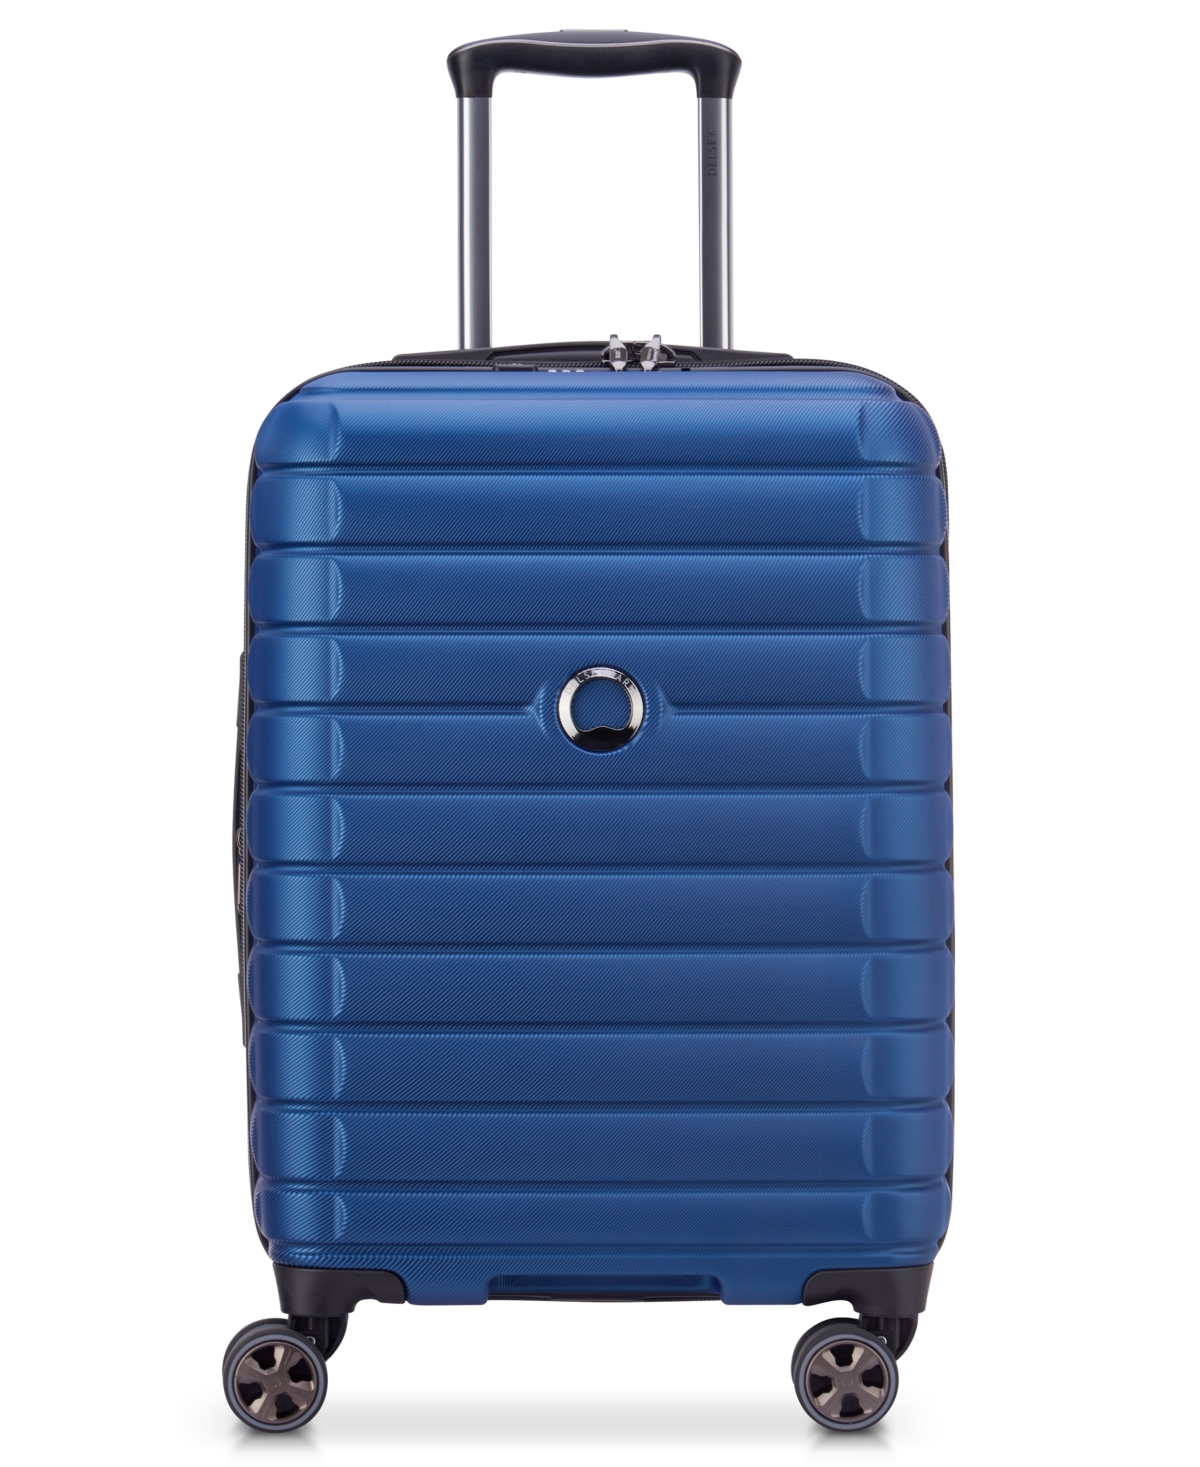 Shadow 5.0 Expandable 20" Spinner Carry on Luggage - Cobalt Blue